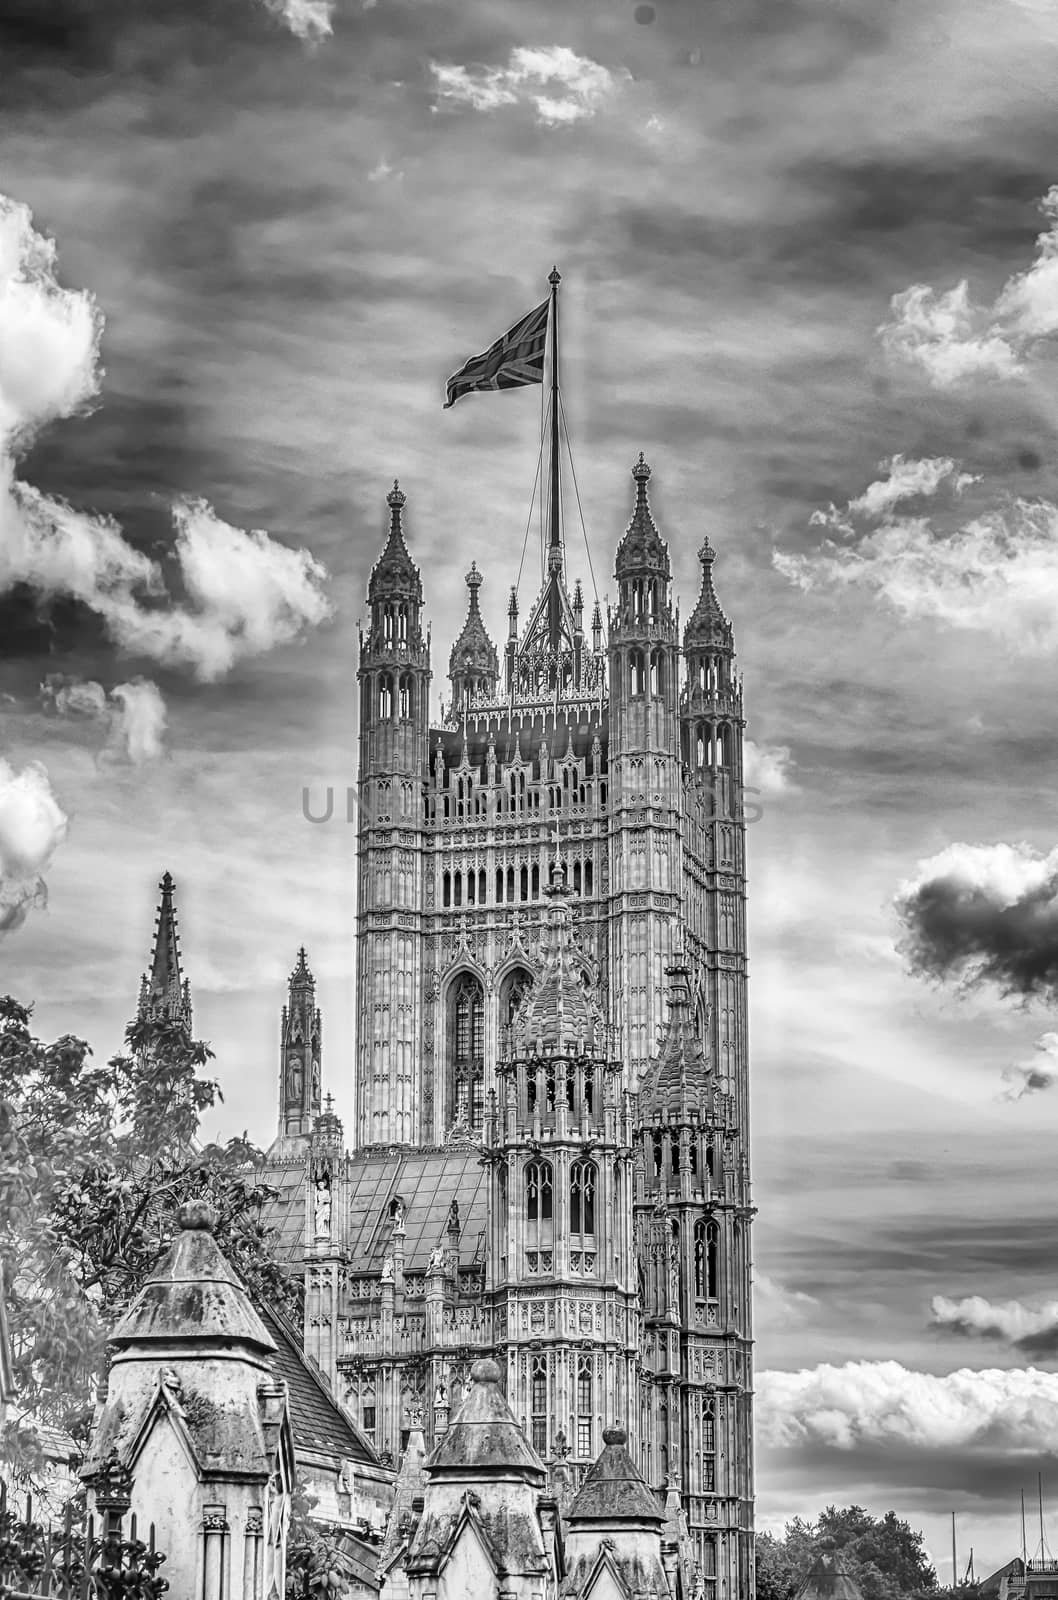 Palace of Westminster, Houses of Parliament, London by marcorubino